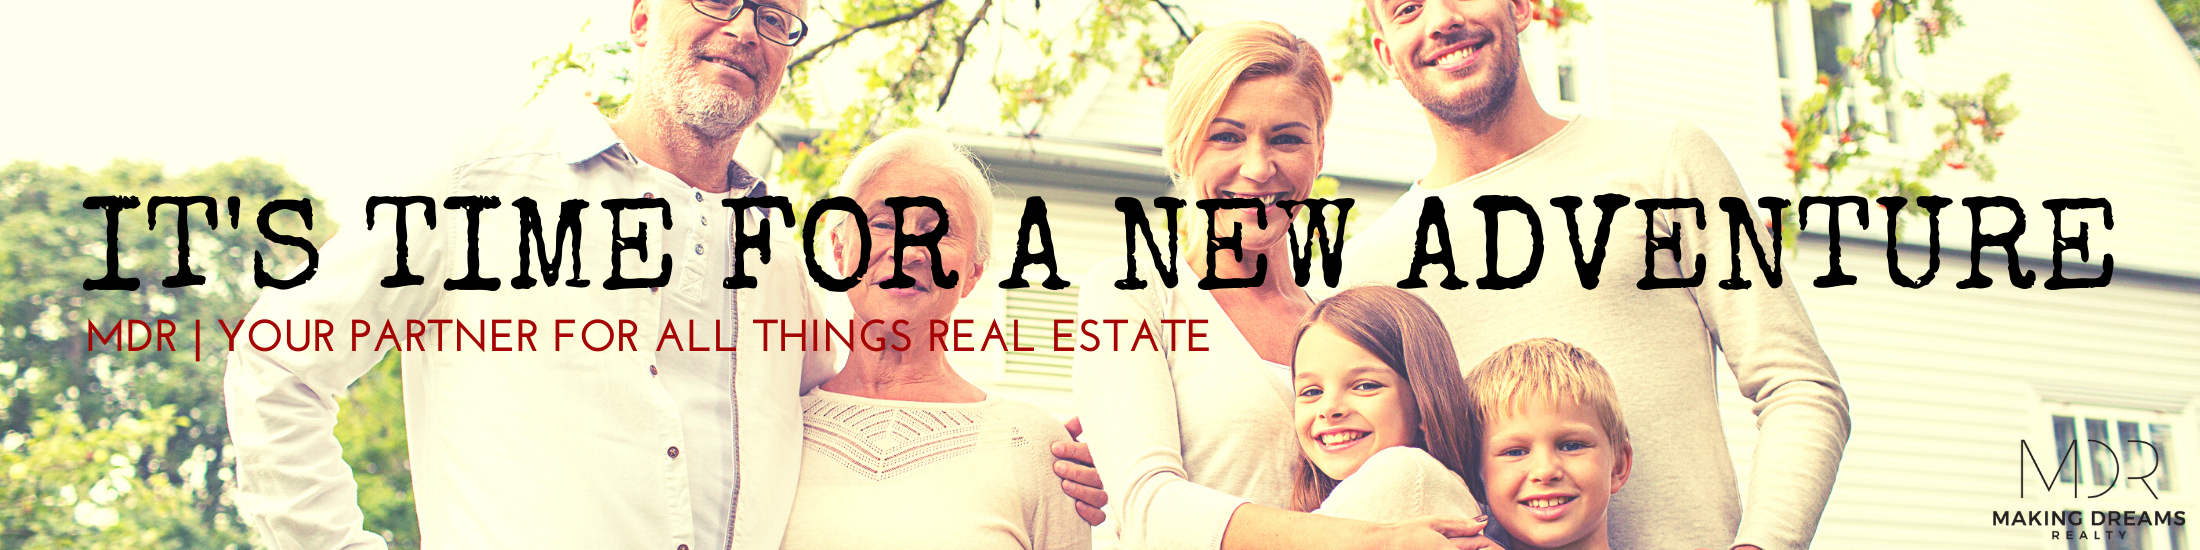 Sell Your Home with MAKING DREAMS Realty